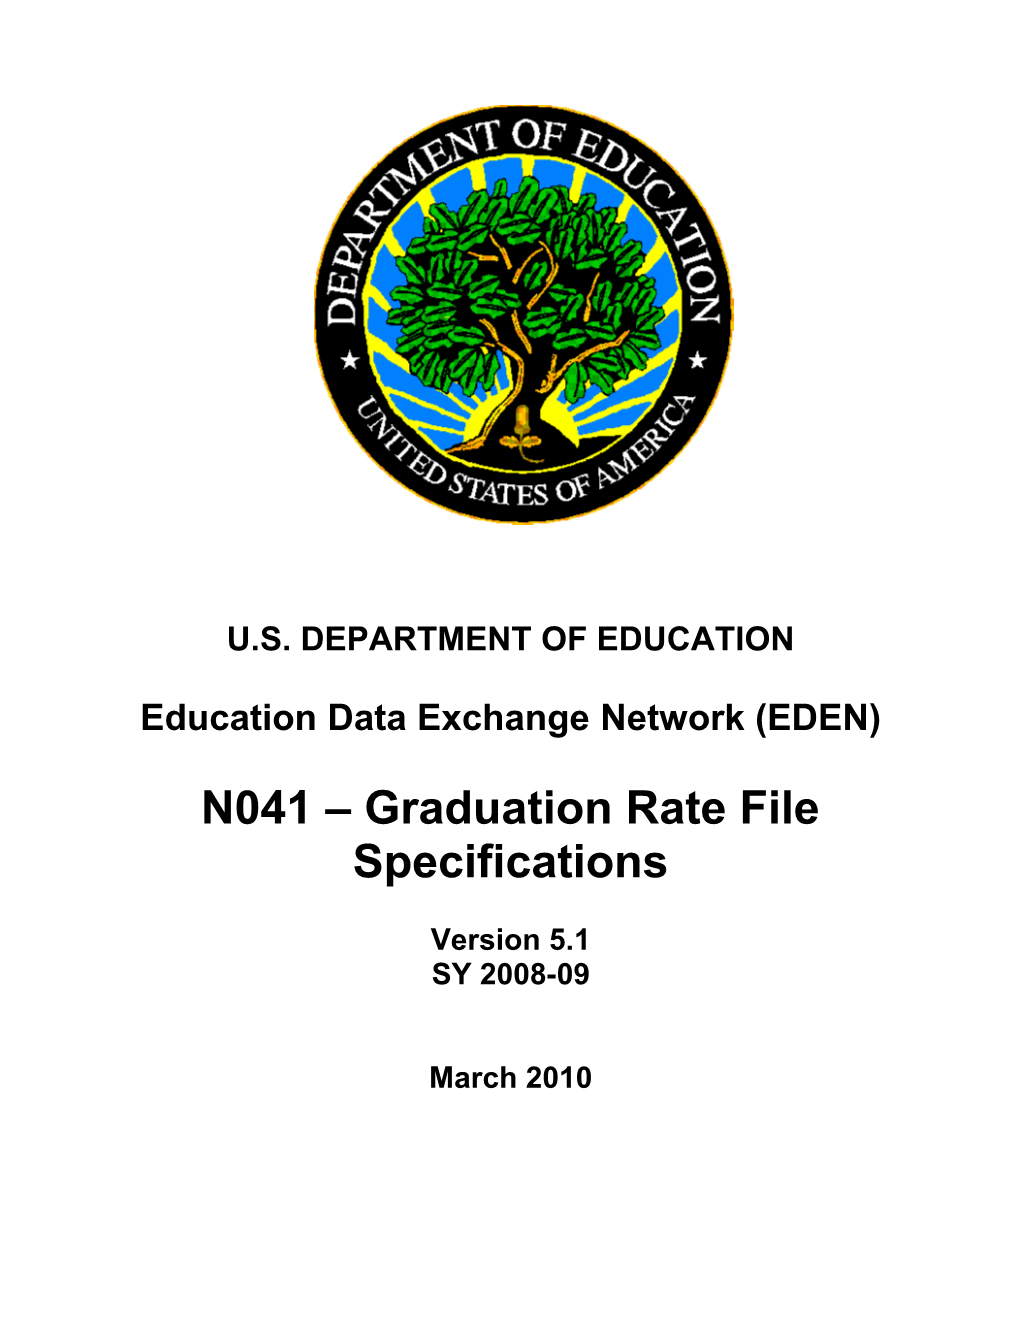 Graduation Rate File Specifications